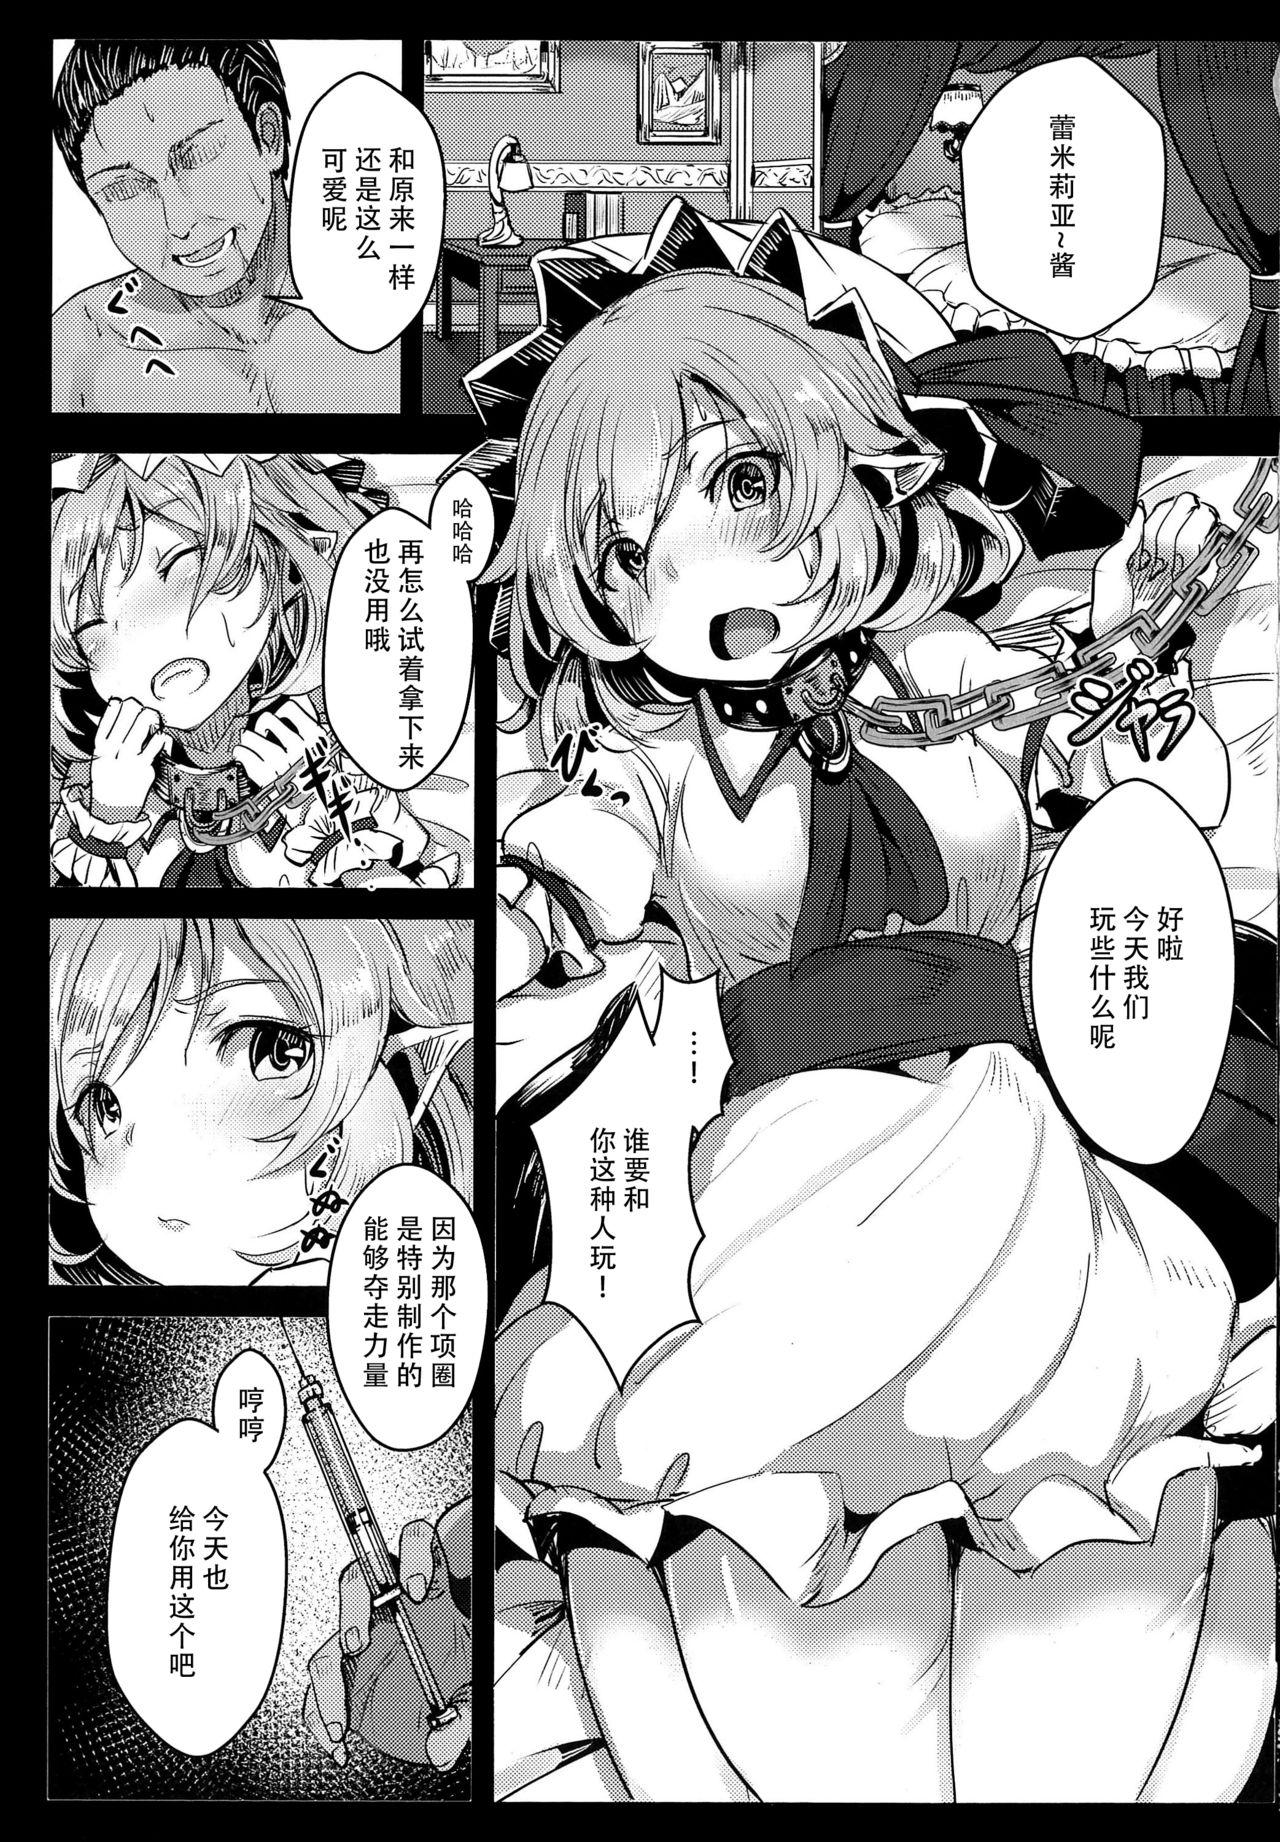 Missionary Position Porn Okusuri Remilia! - Touhou project Relax - Page 3